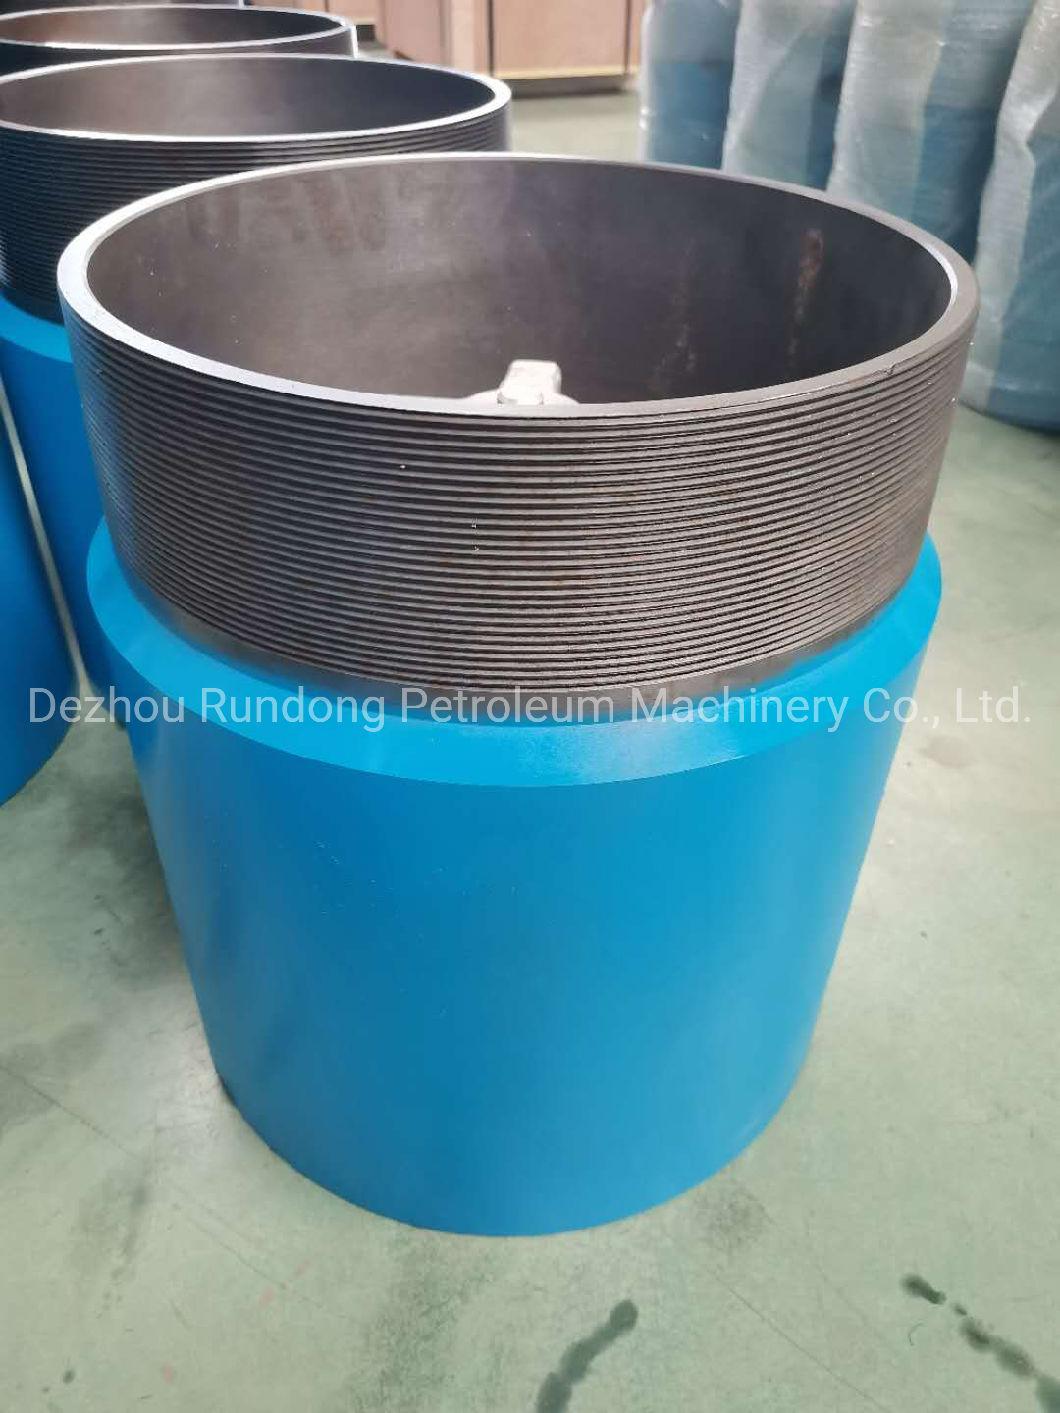 API Standard Downhole Cementing Float Collar and Float Shoes Normal Size 20" 18 5/8" 13 3/8" 9 5/8" 7" 5 1/2"